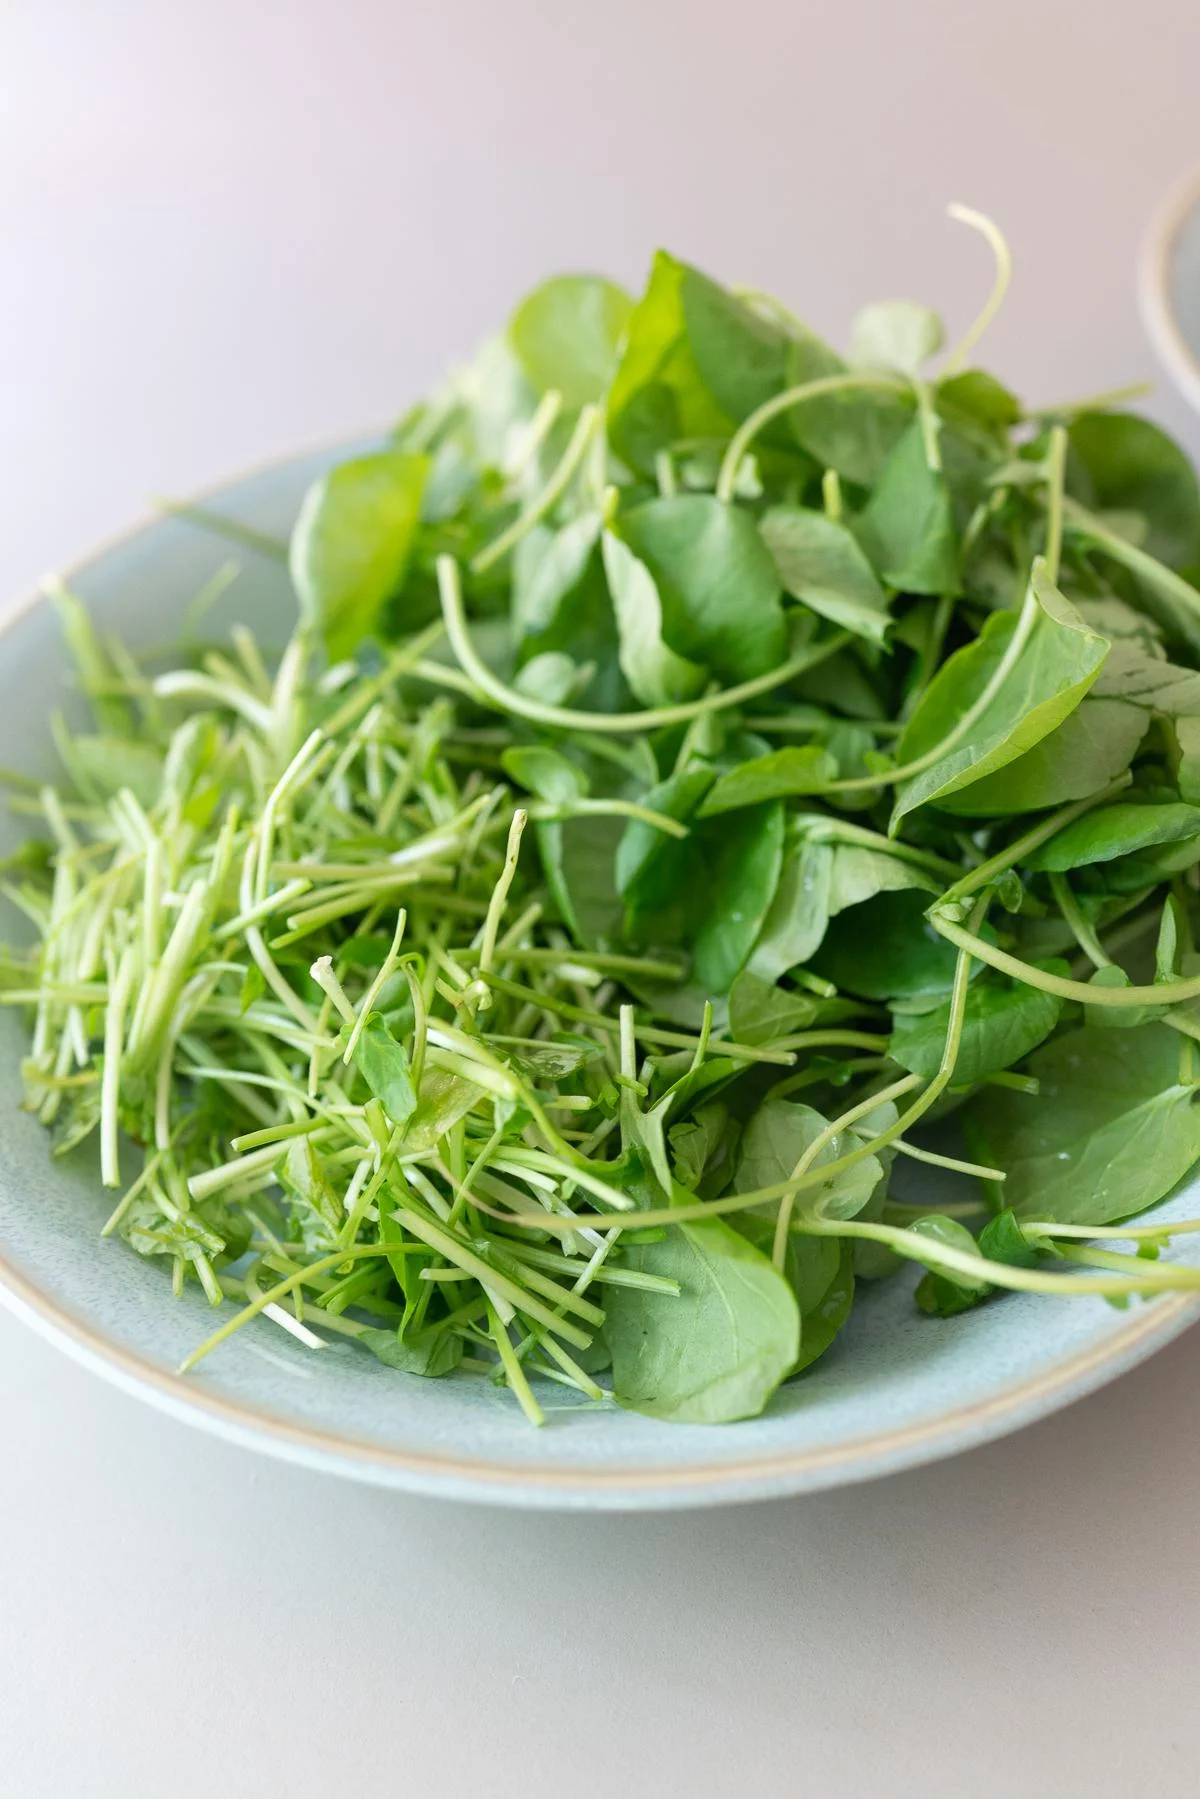 Fresh watercress stems and leaves